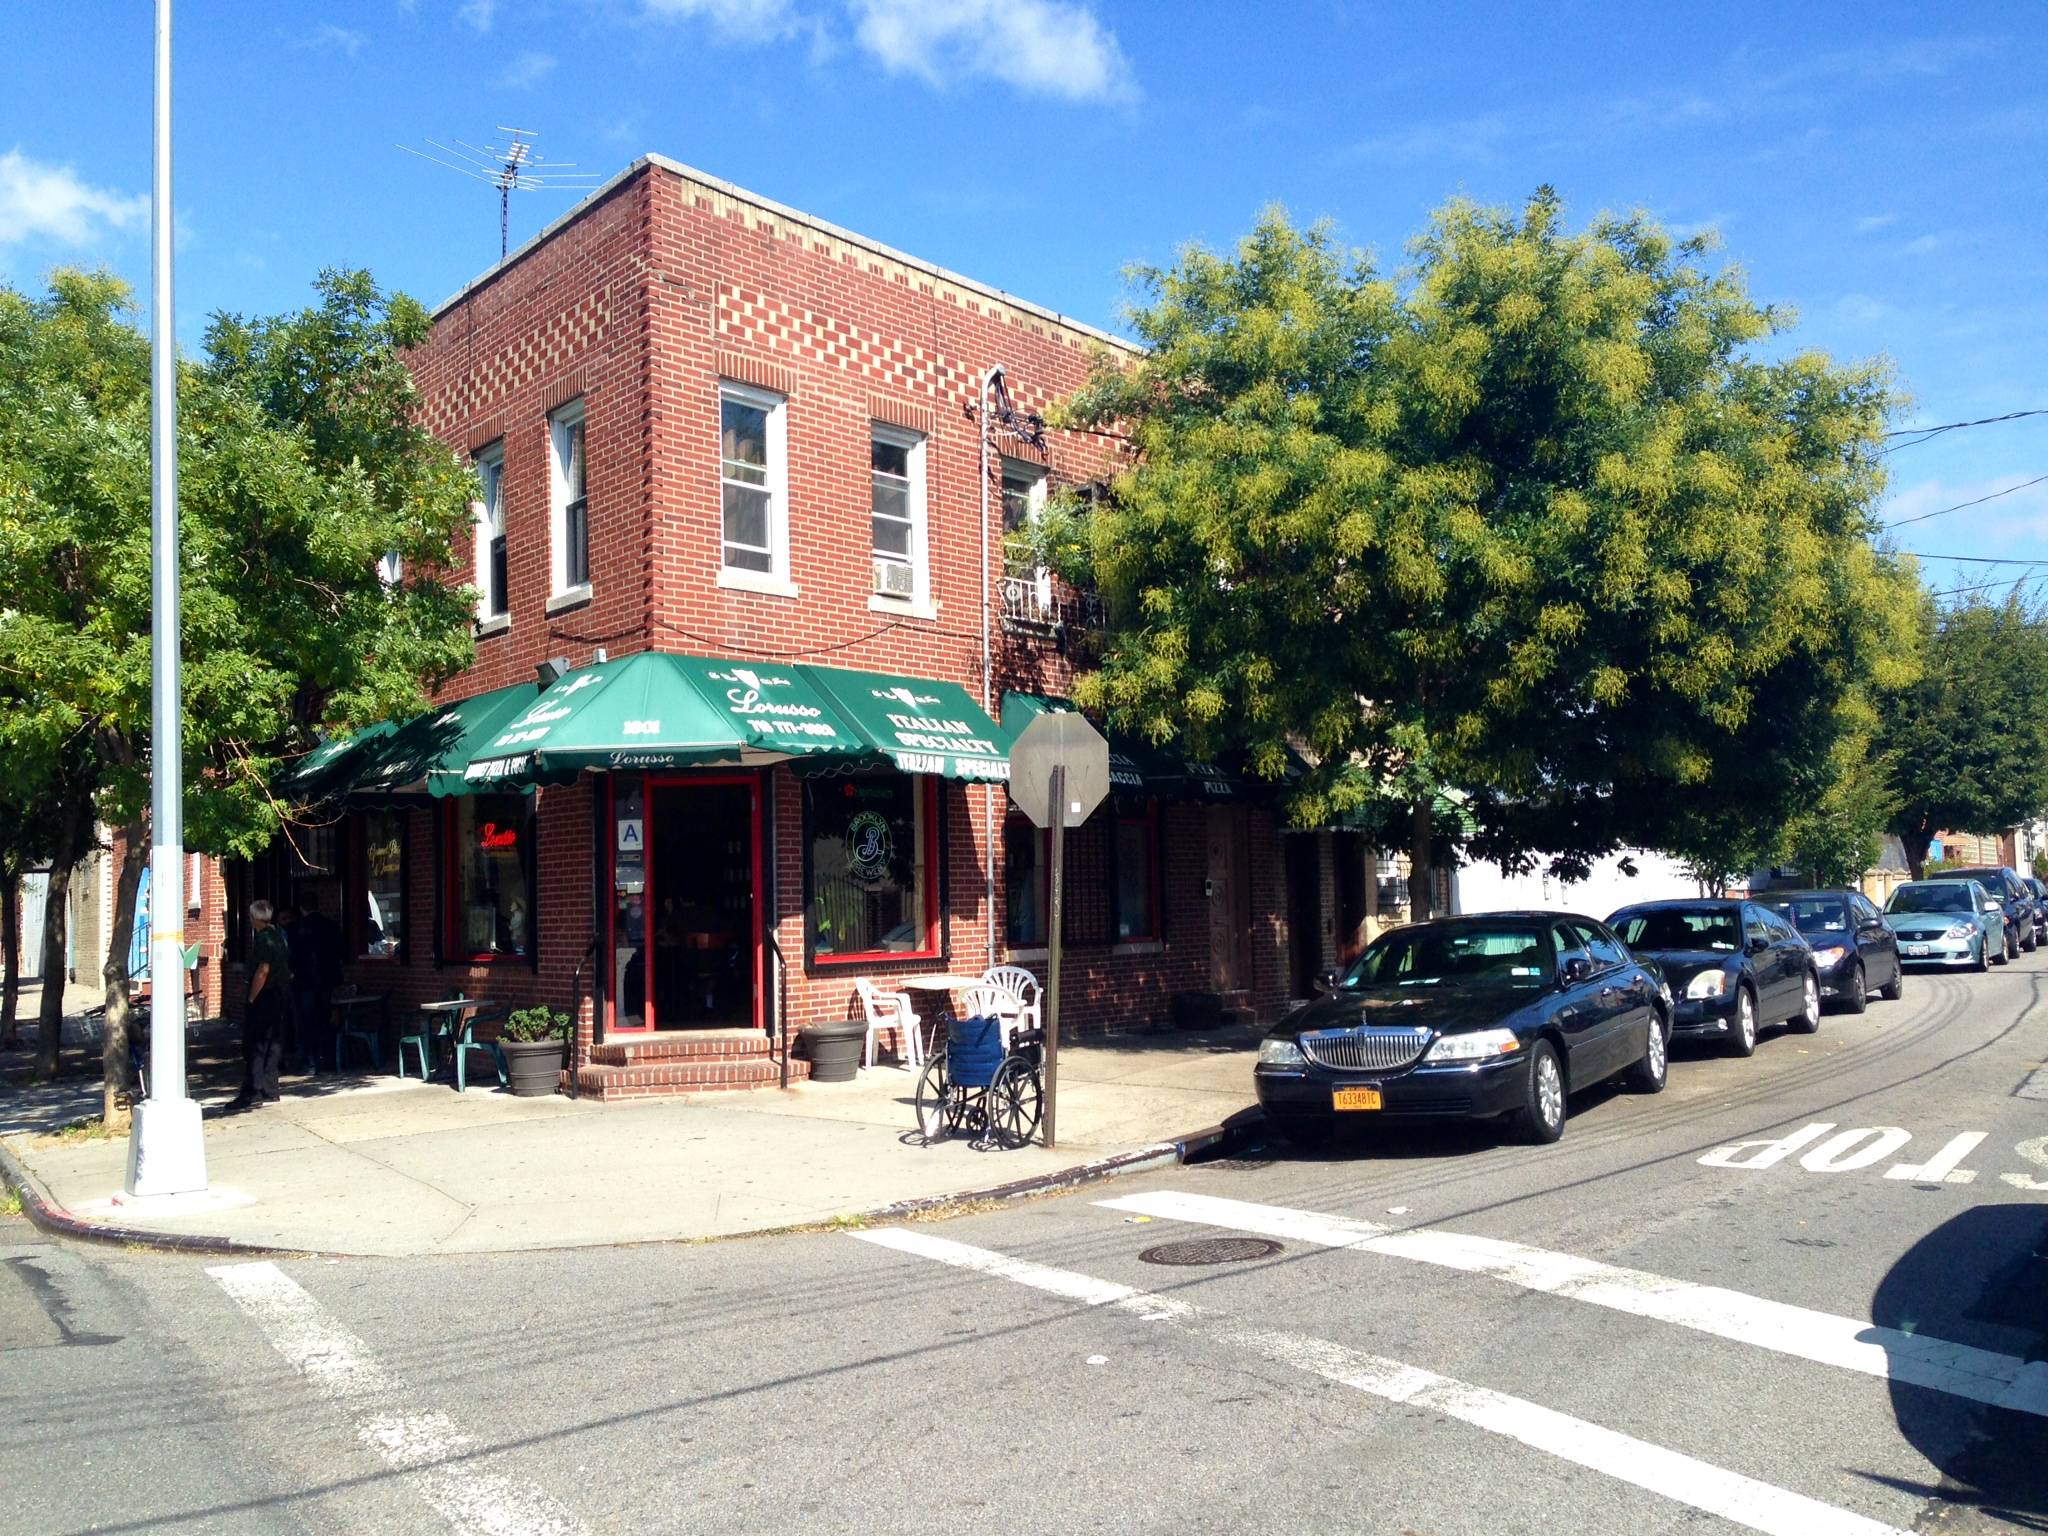 Corner lot, mixed-use commercial property in Astoria, Queens. Italian famous cafe + 3 bedroom apartment with a big terrace and a basement. Great investment opportunity!